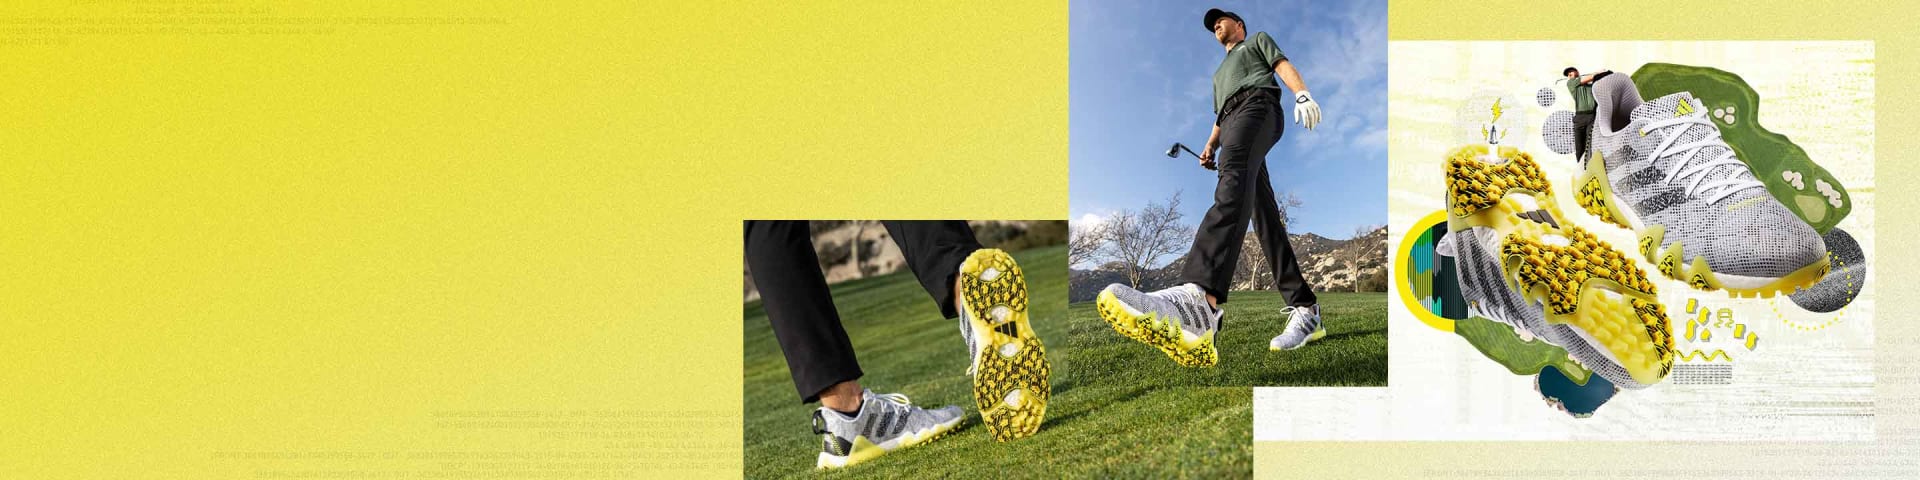 One photo showing the bottom of CODECHAOS 22, one photo of Daniel Berger walking on a golf course wearing CODECHAOS 22, one photo of CODECHAOS 22 golf shoes